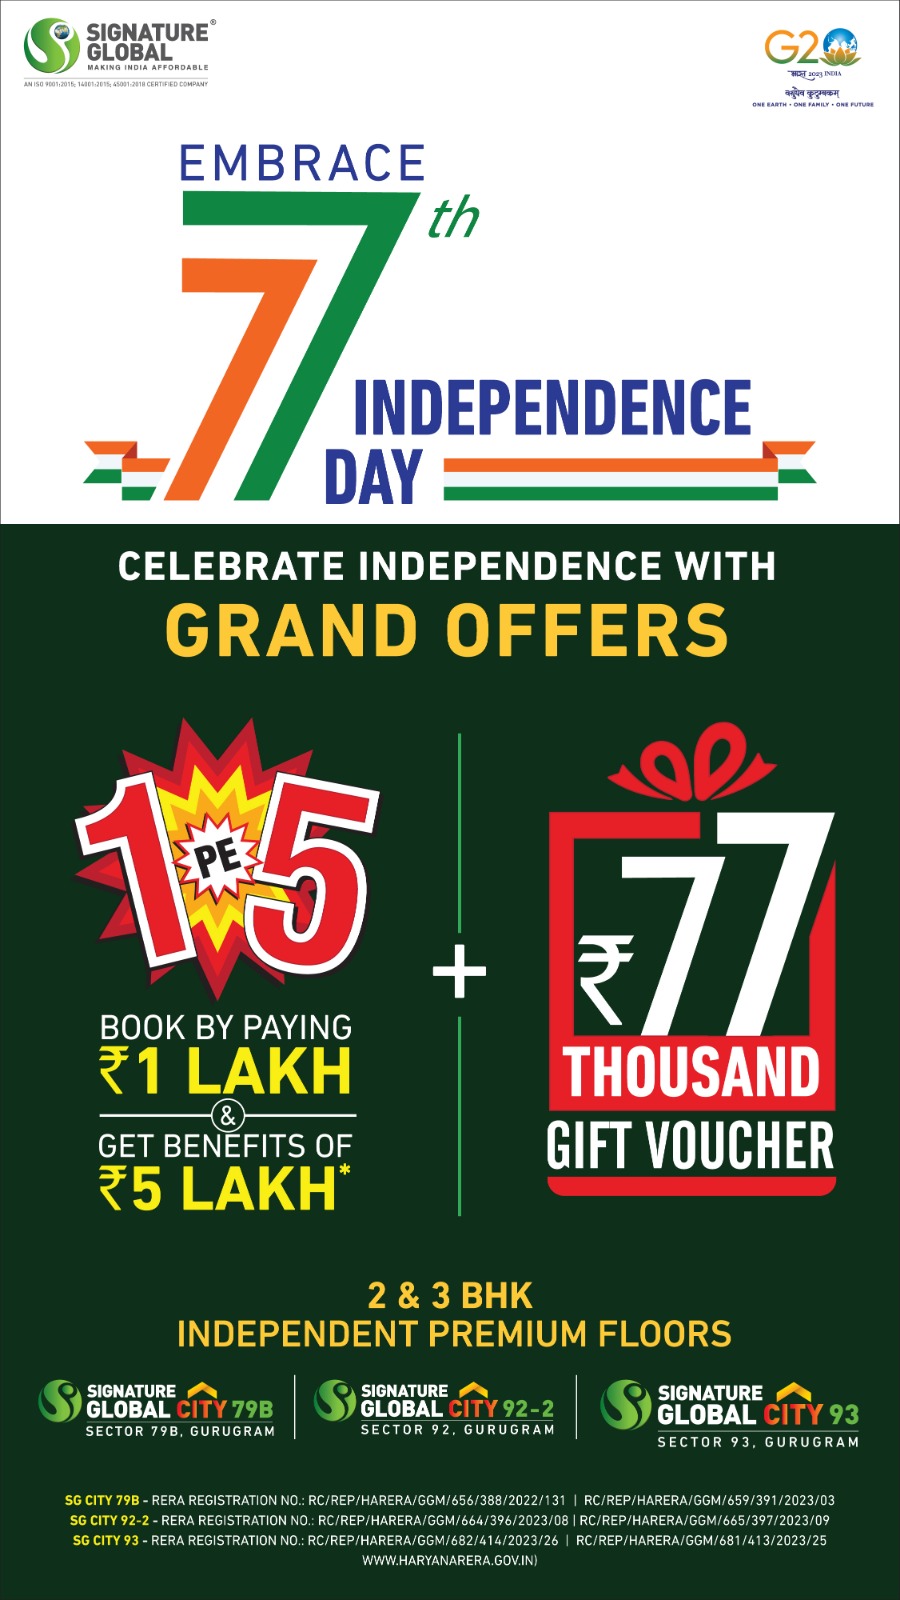 Glorious 77th Independence Day Celebrate Independence with grand offers at Signature Global, Gurgaon Update